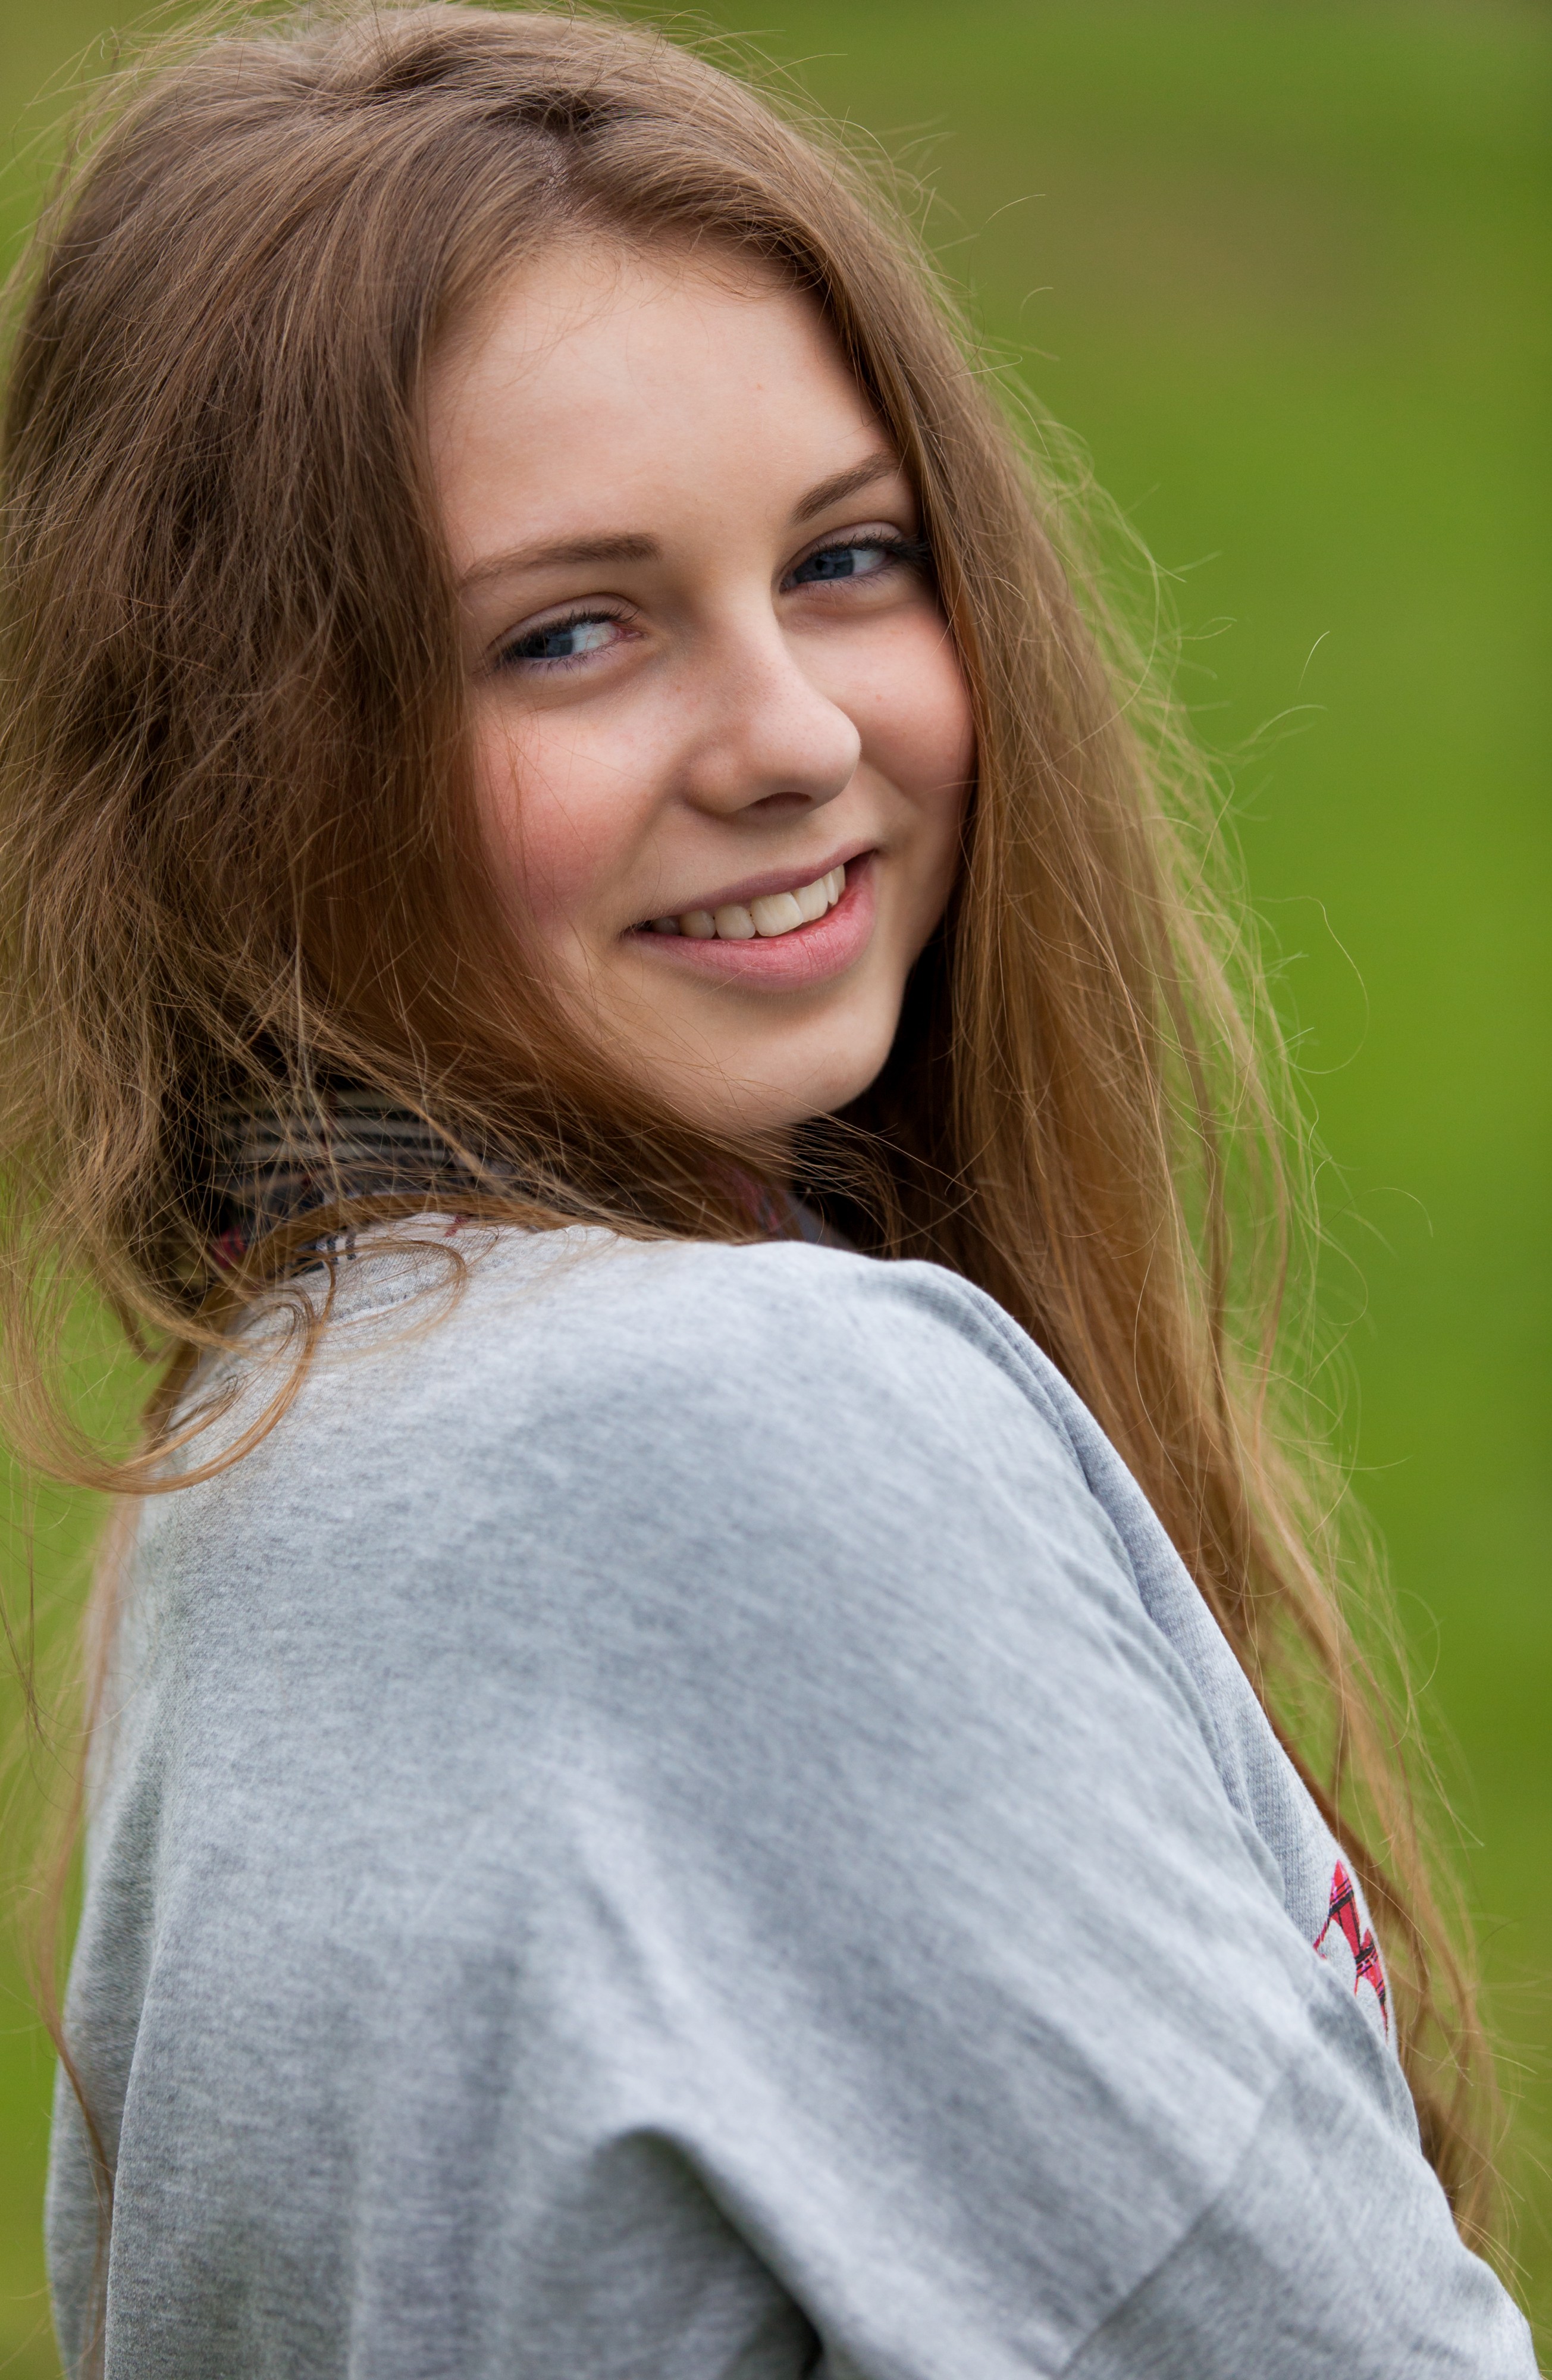 a 15 year-old Catholic girl photographed in May 2015, picture 8